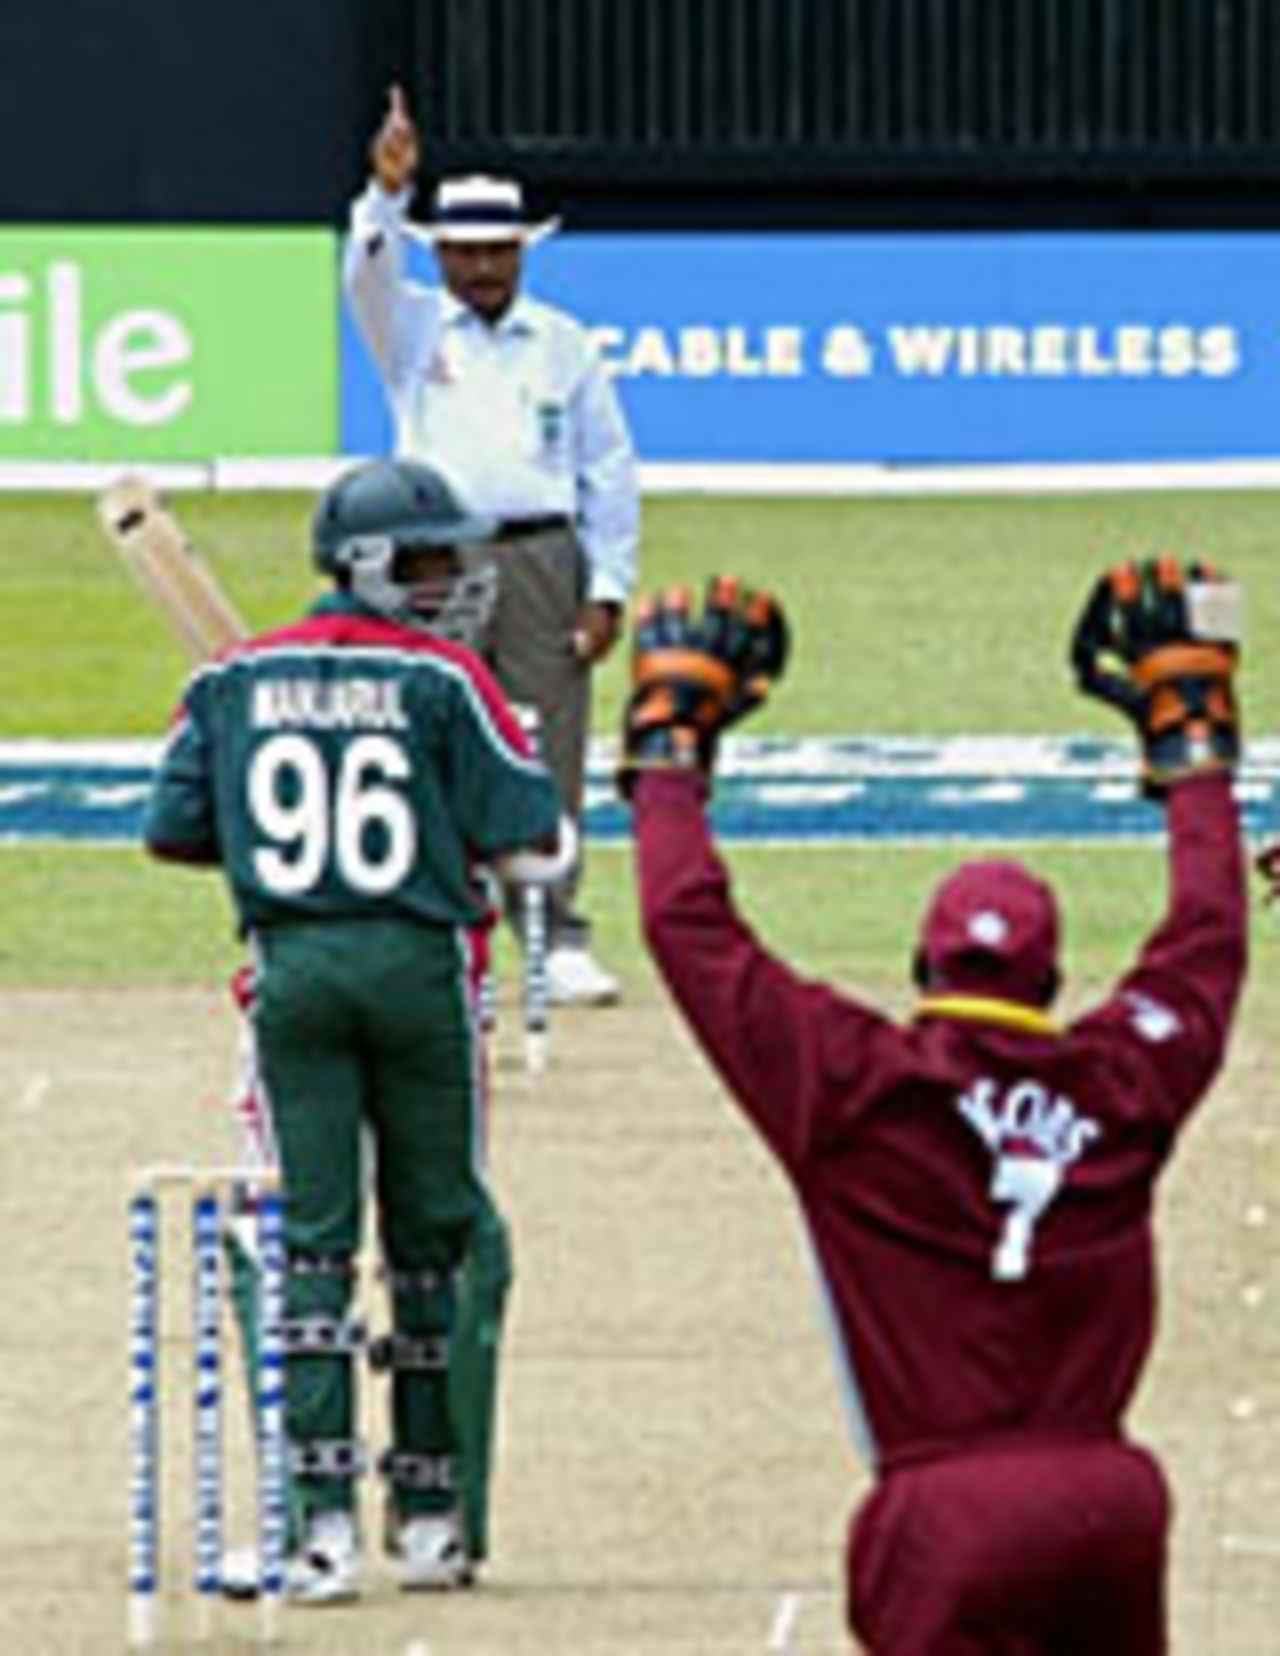 Manjural Islam is lbw to Fidel Edwards as Bangladesh slip to 5 for 3, West Indies v Bangladesh, 1st ODI, St Vincent, May 15, 2004